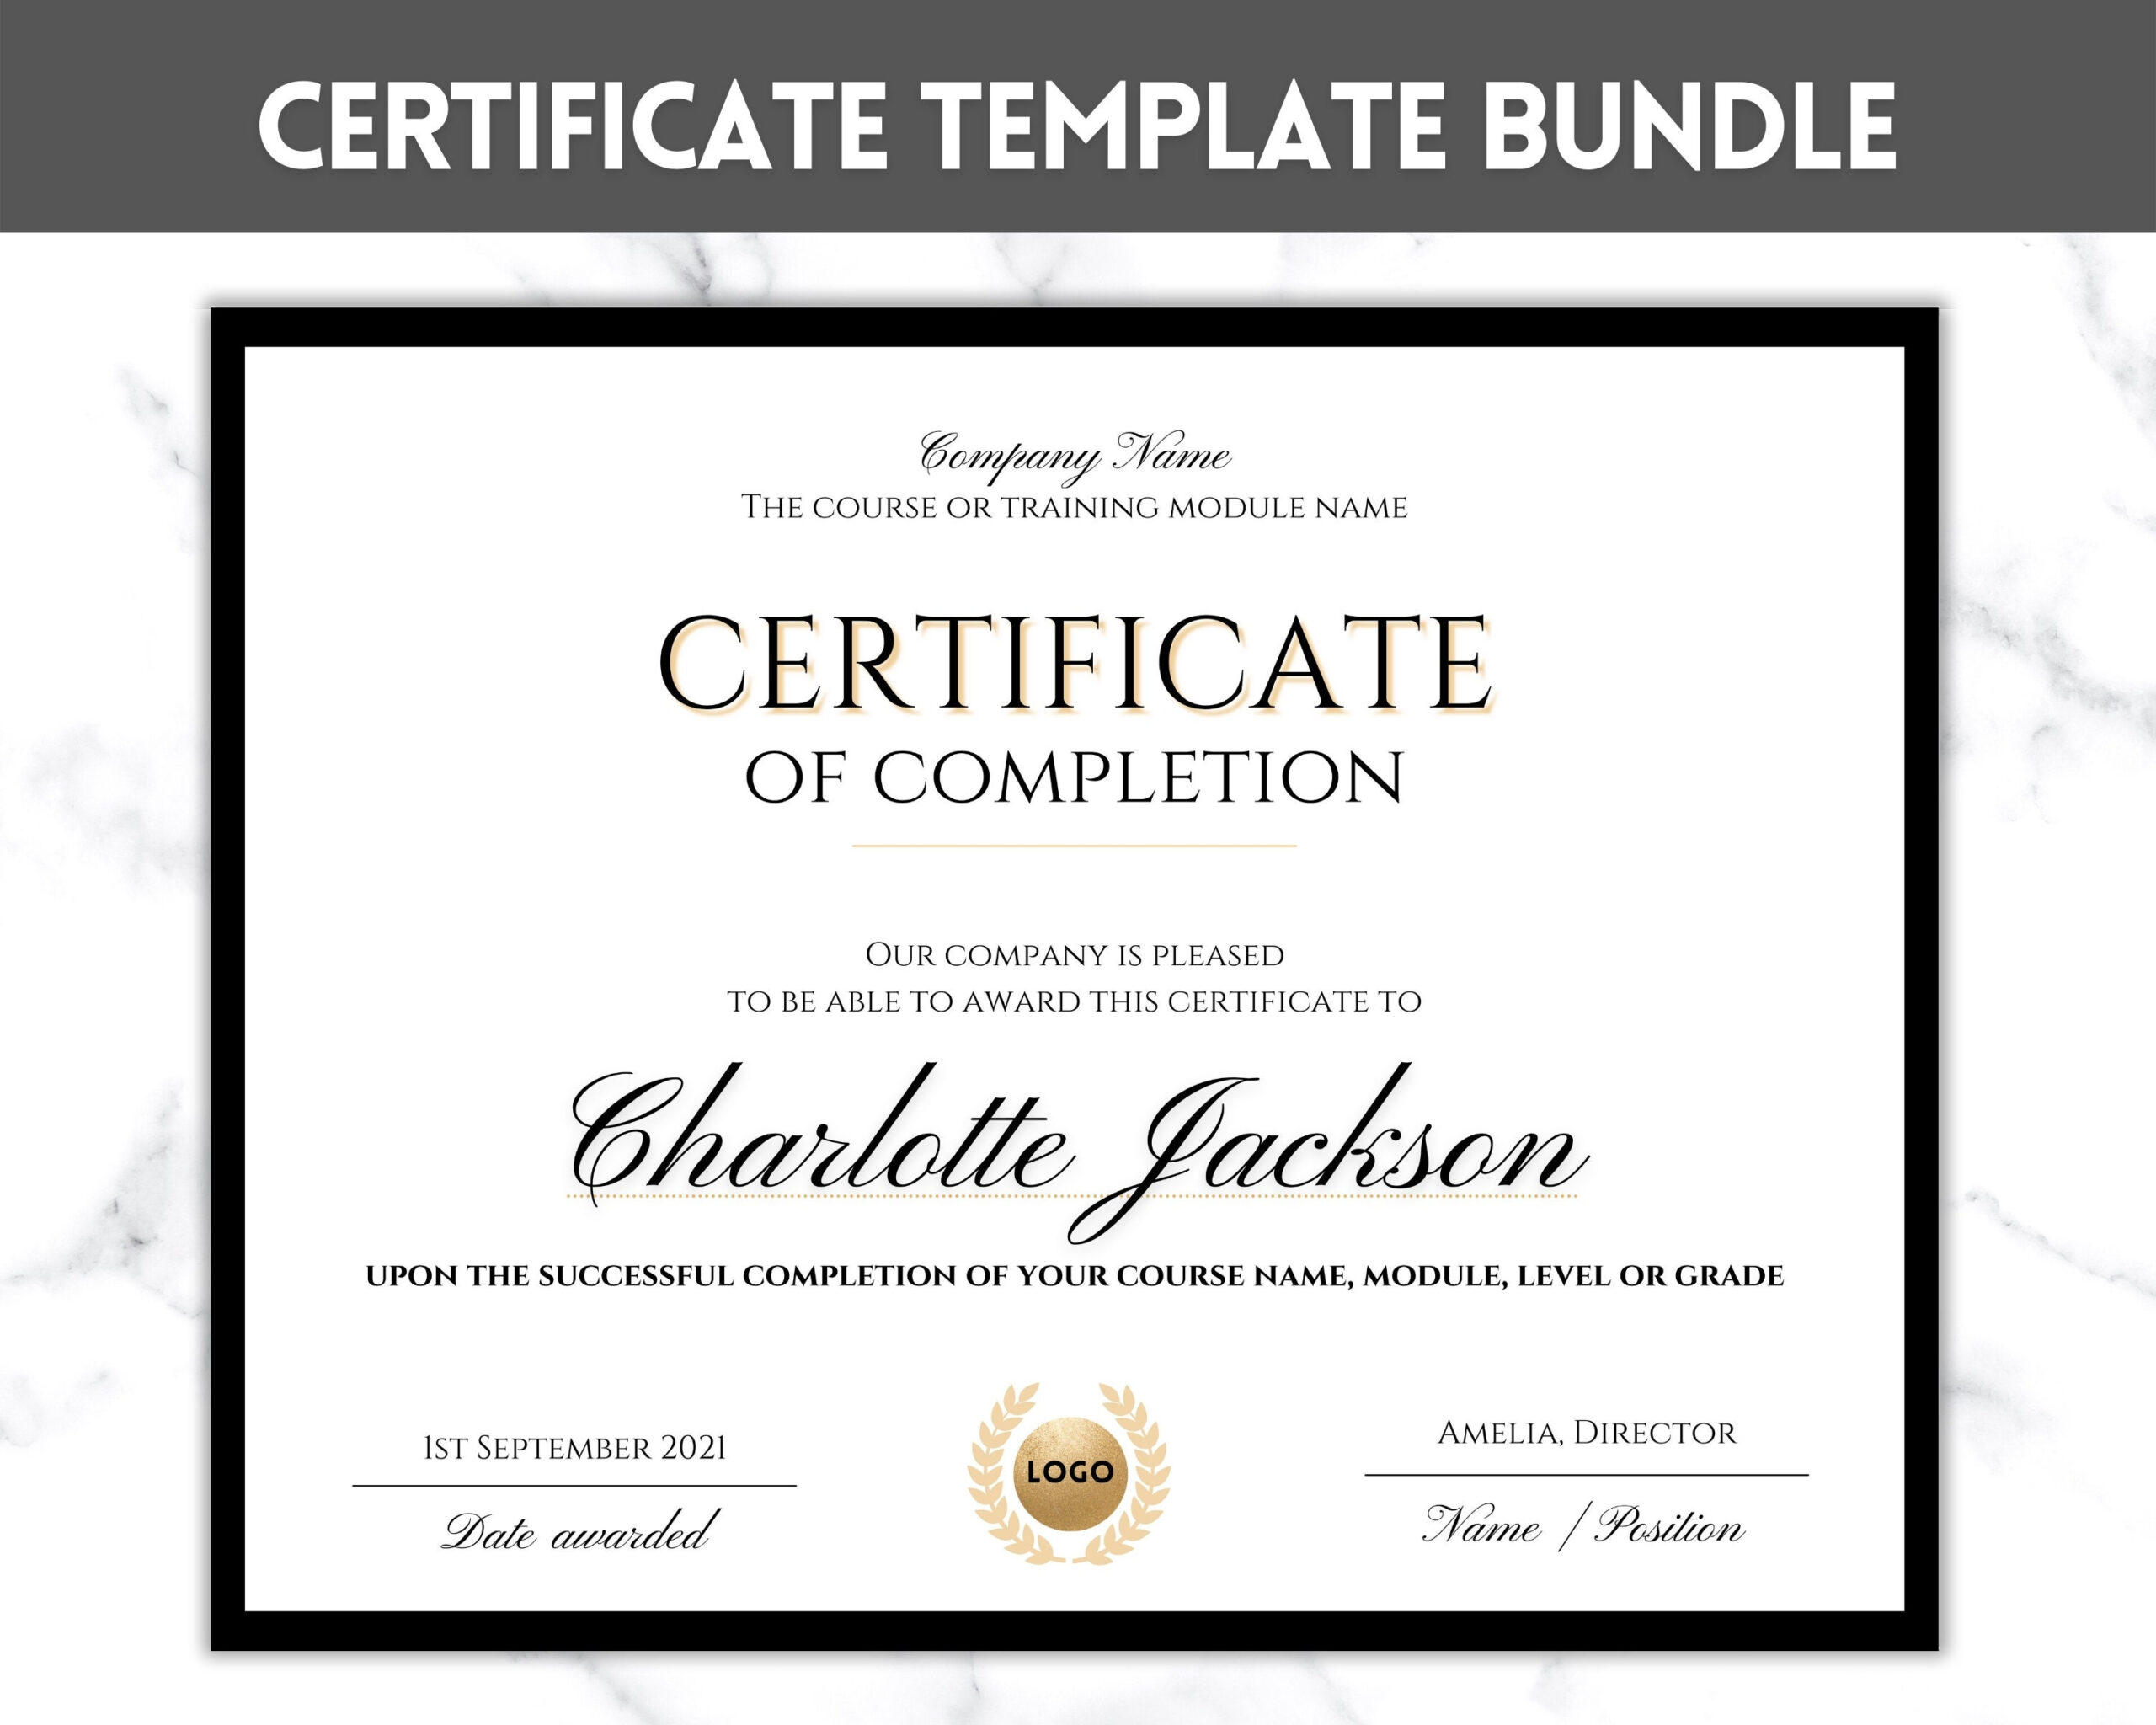 Certificate of Completion Template BUNDLE Editable - Etsy With Certification Of Completion Template